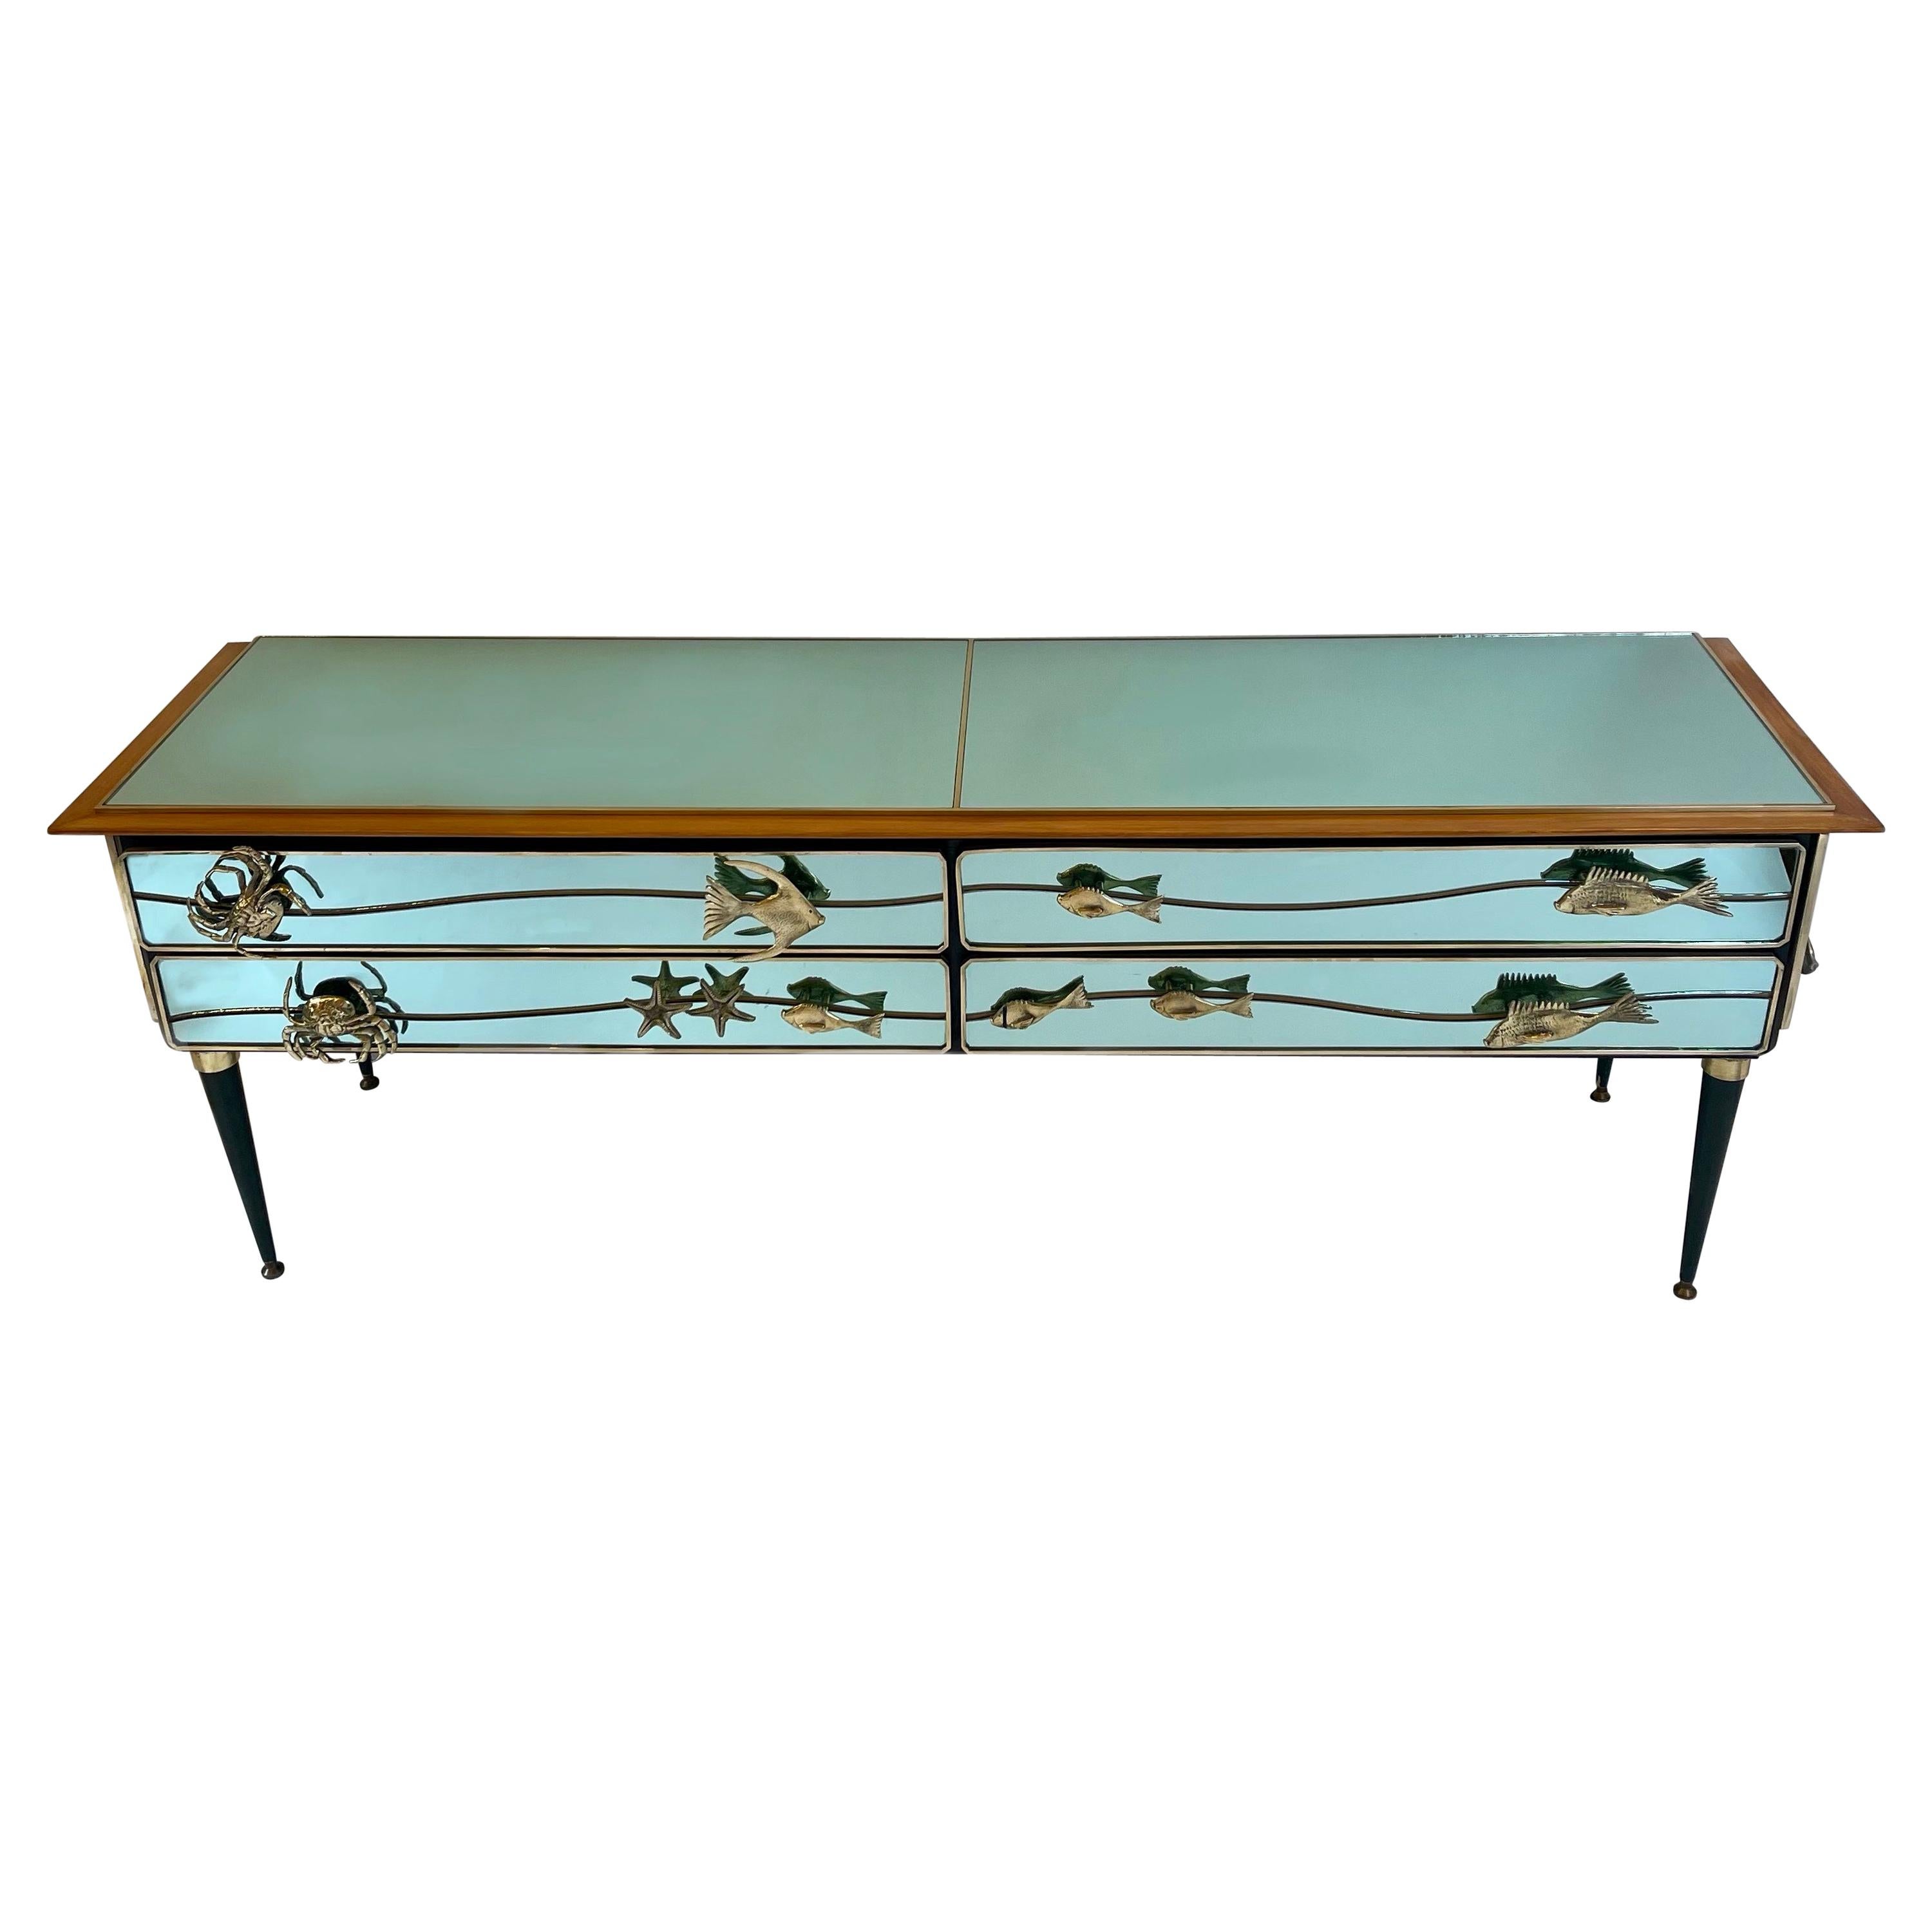 Late 20th Century Mint Green Mirror w/ Bronze & Brass Details Chest of Drawers